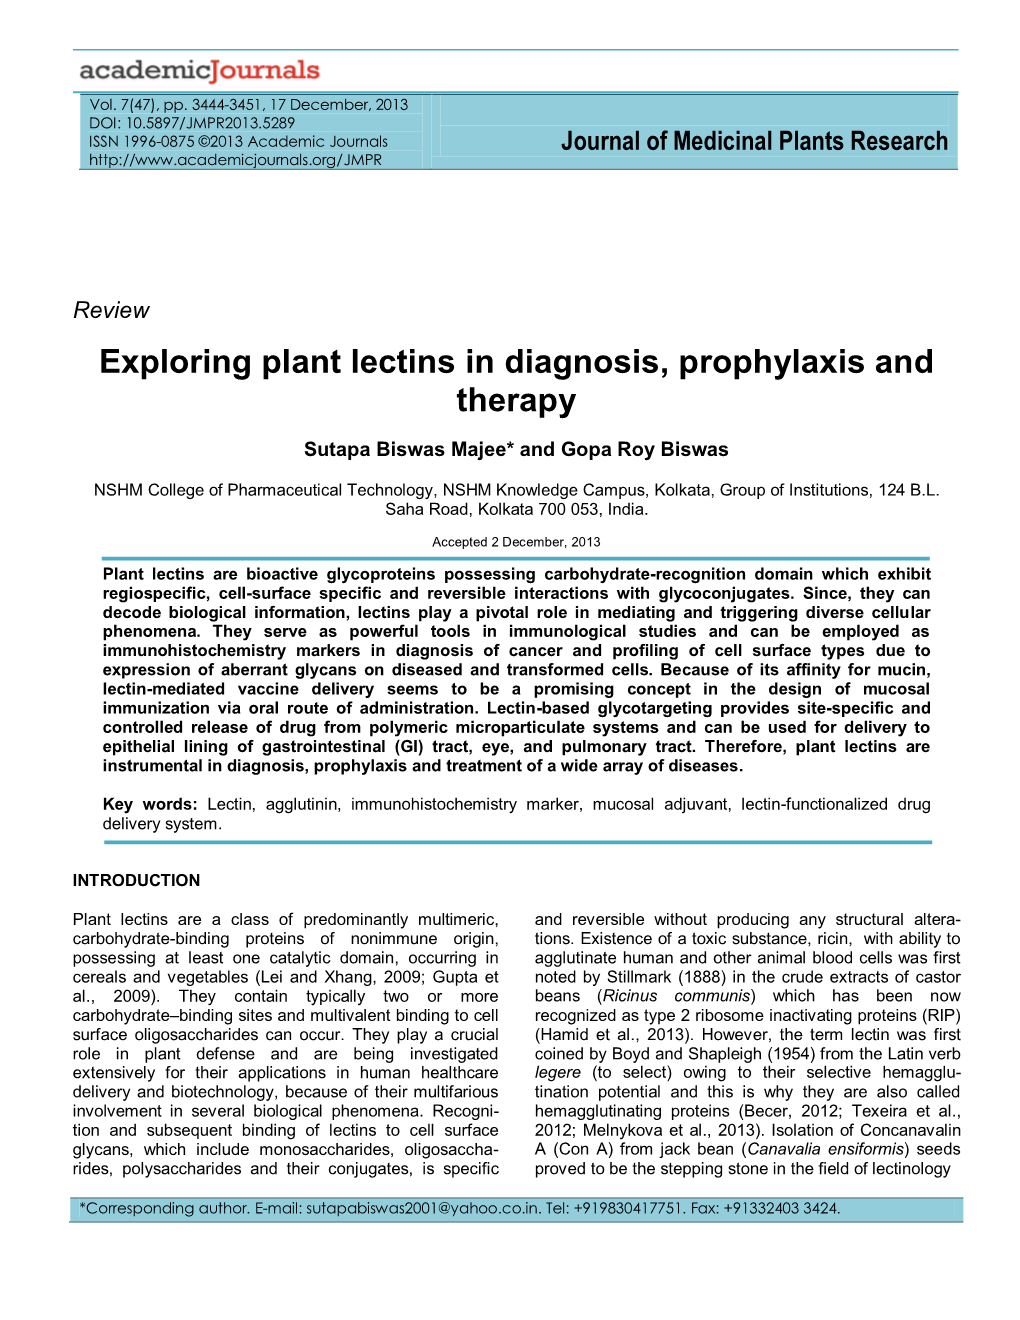 Exploring Plant Lectins in Diagnosis, Prophylaxis and Therapy